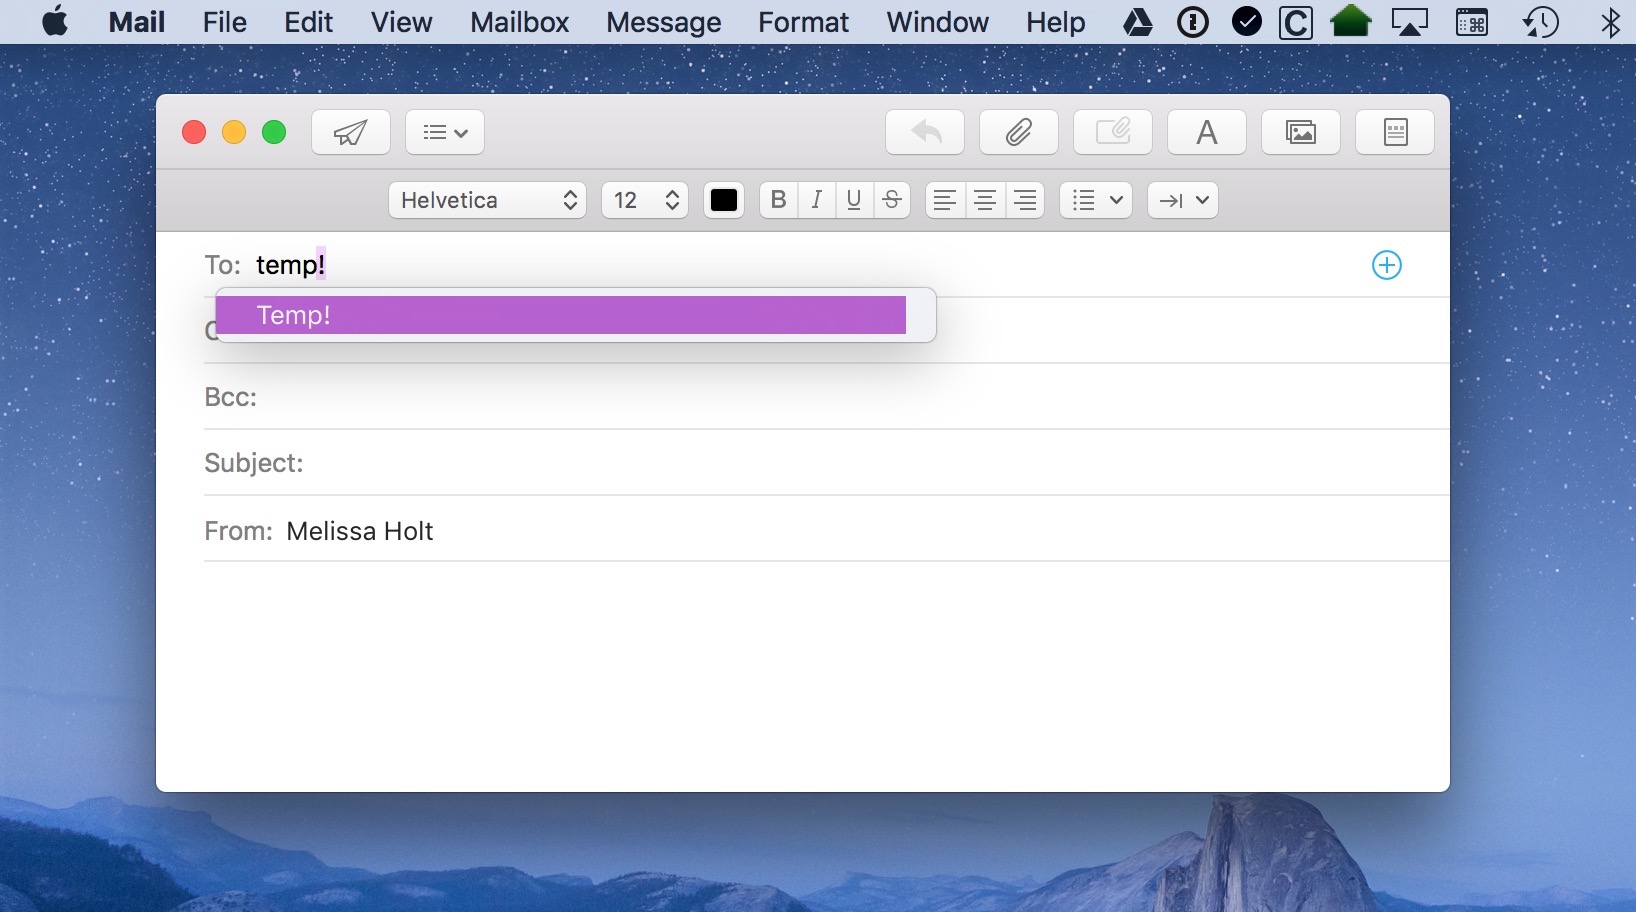 How to Send Emails to Multiple Contacts on Mac